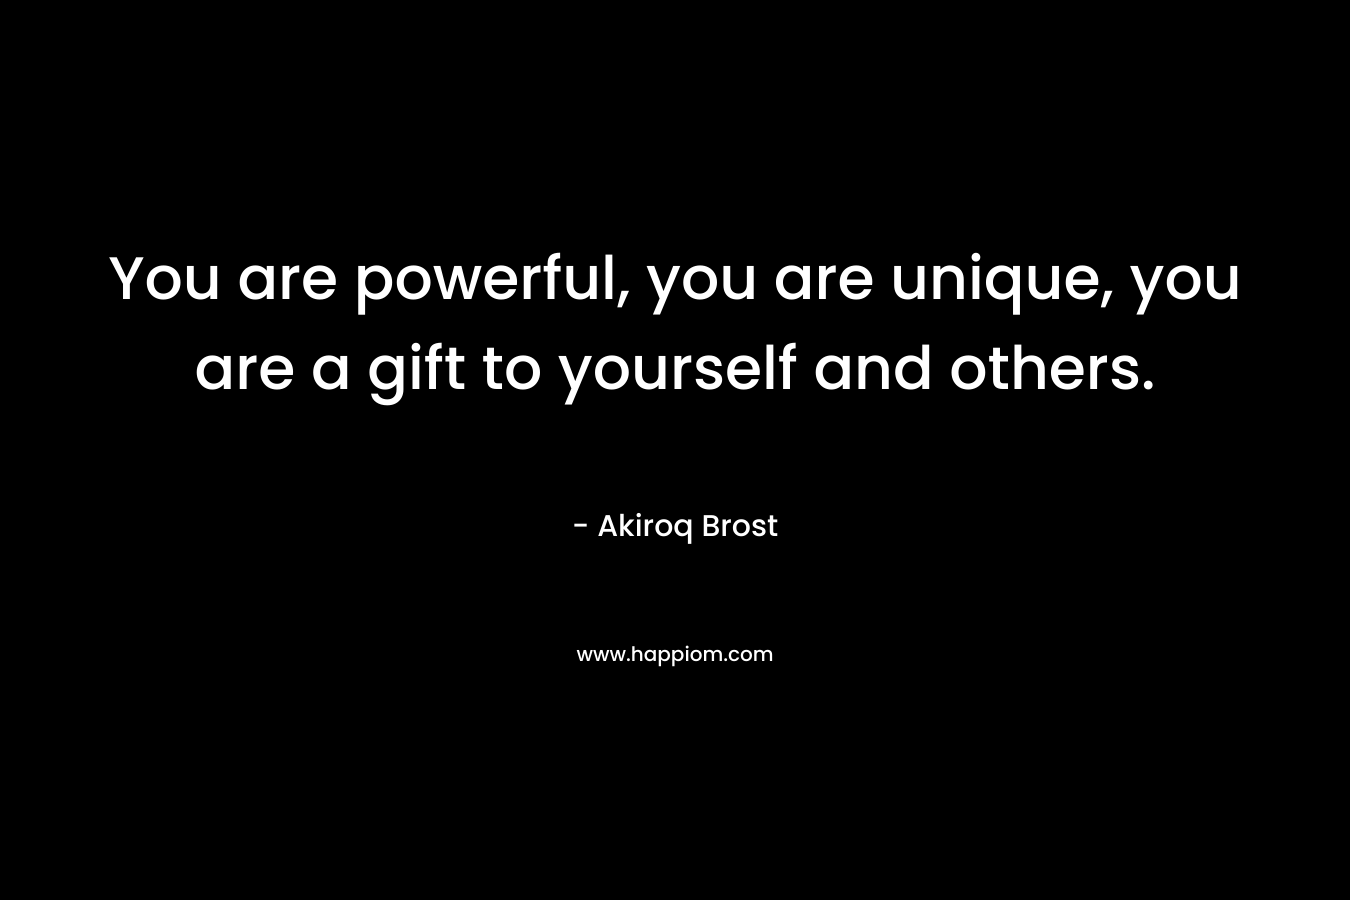 You are powerful, you are unique, you are a gift to yourself and others.